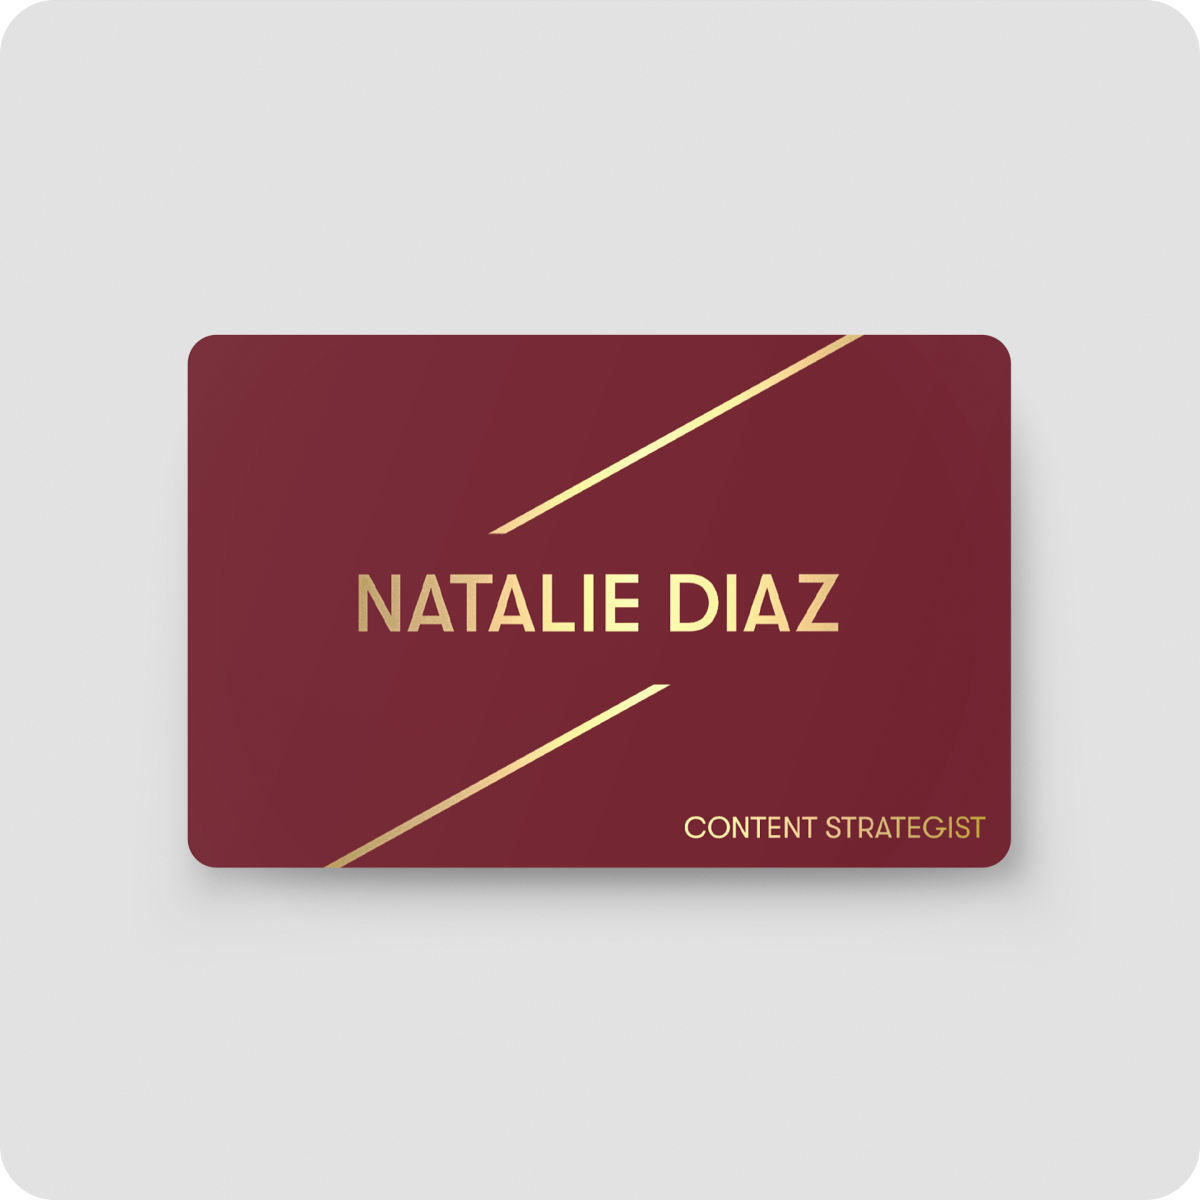 One Good Card | Smart Digital Name Card (Parallels) - Personalised Near Field Communication (NFC) Business Cards designs.